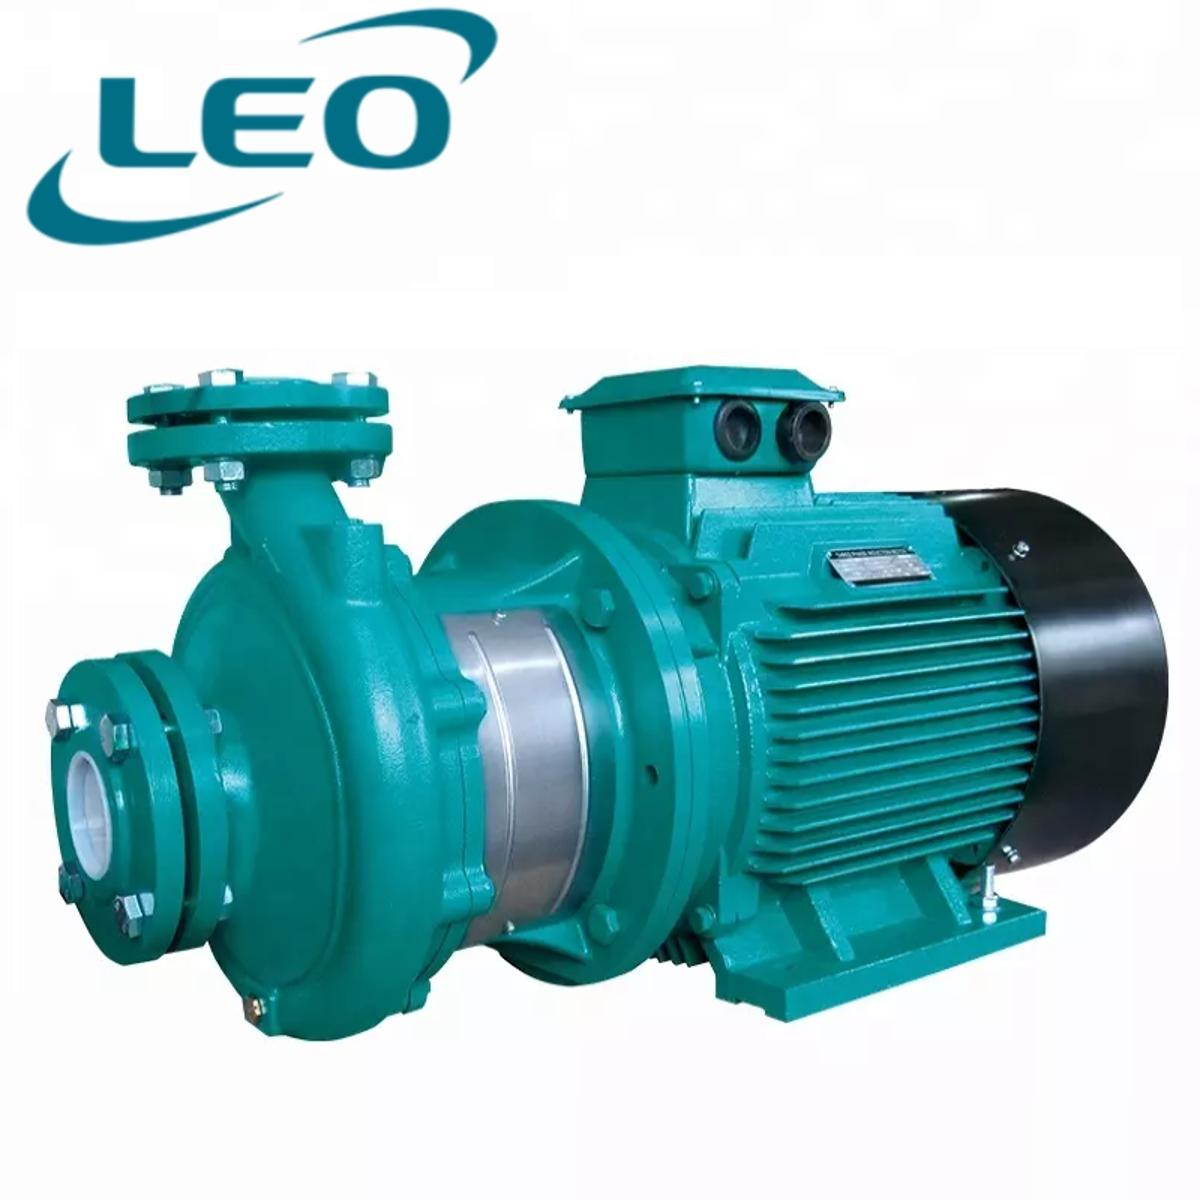 LEO - XST-65-200-185 - 18500 W - 25 HP - Clean Water HEAVY DUTY Centrifugal Pump With FLANGES  - 380V~400V THREE PHASE - SIZE :- 3" x 2 1-2 " - European STANDARD